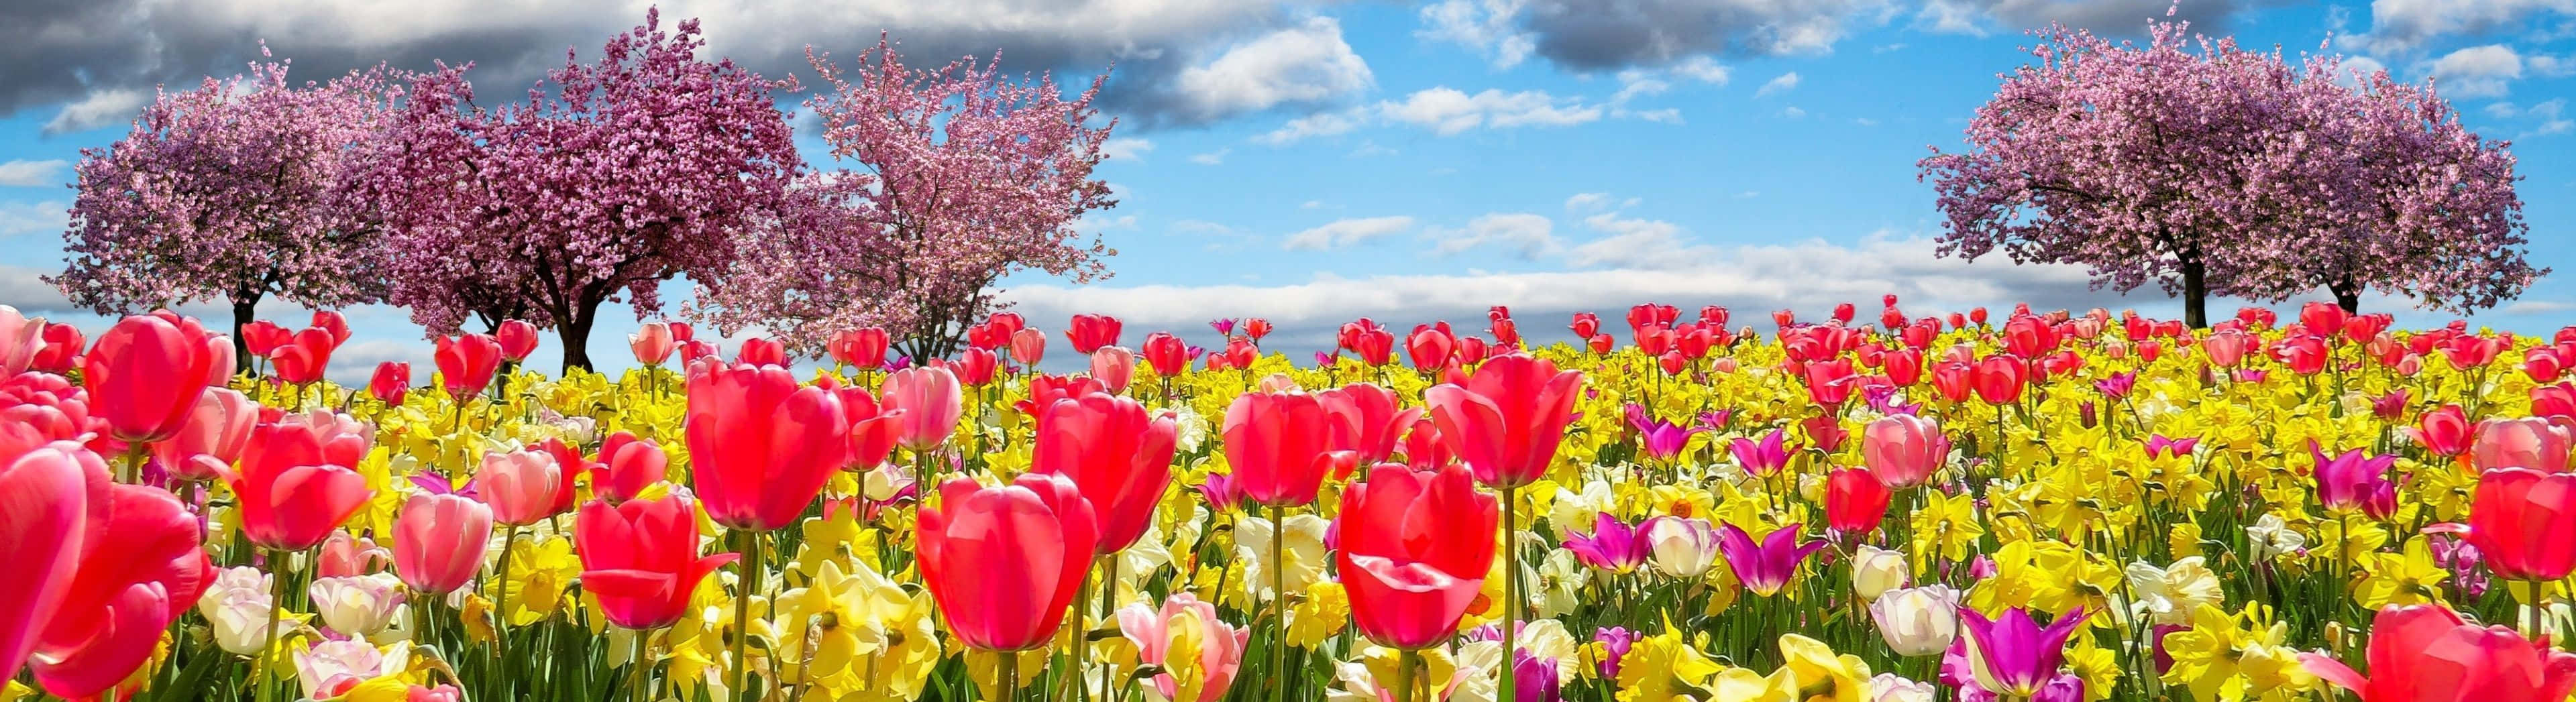 Admire the beauty of nature during the spring season Wallpaper